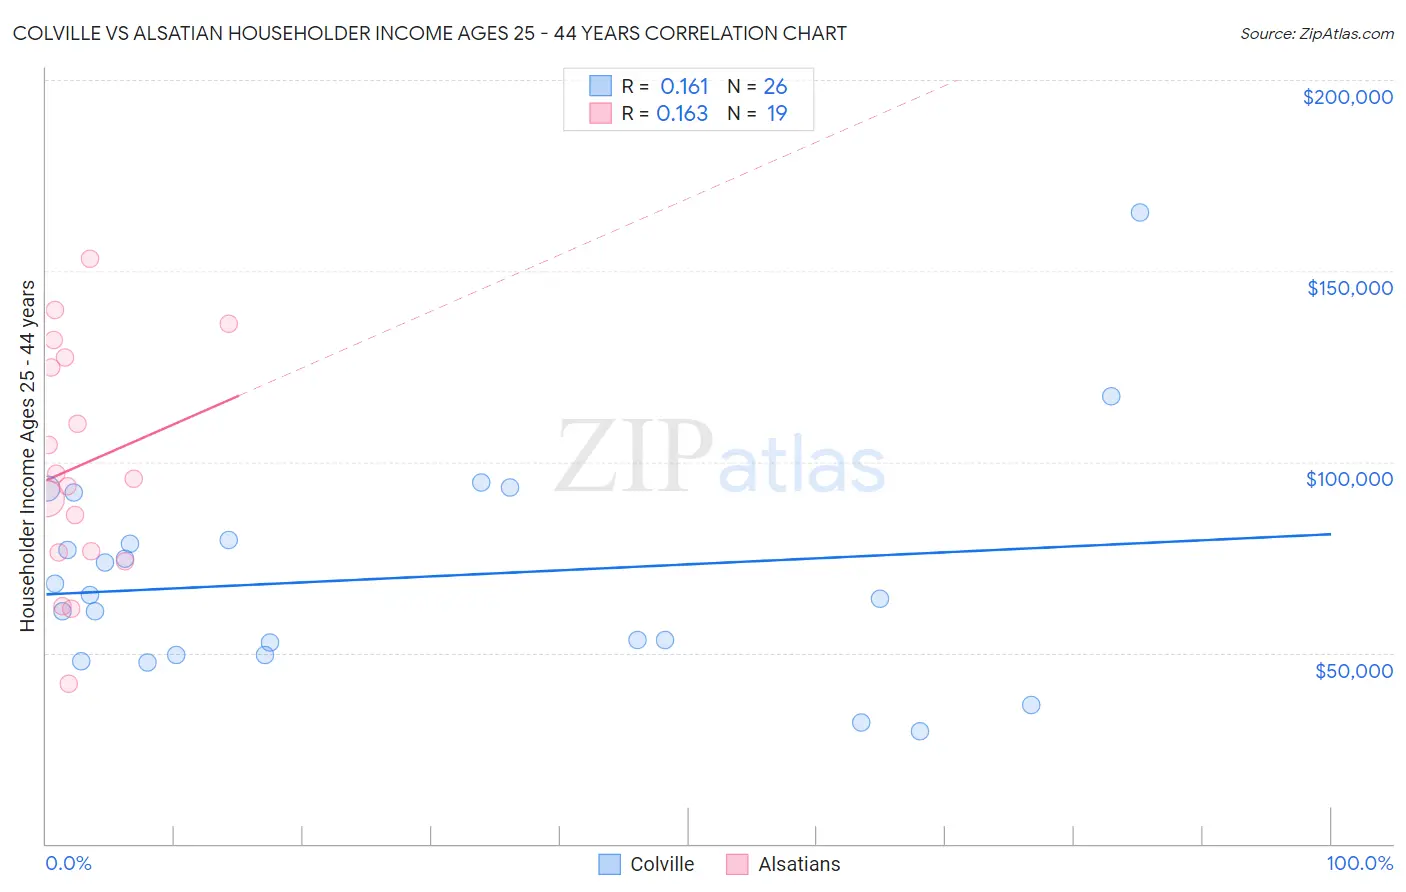 Colville vs Alsatian Householder Income Ages 25 - 44 years